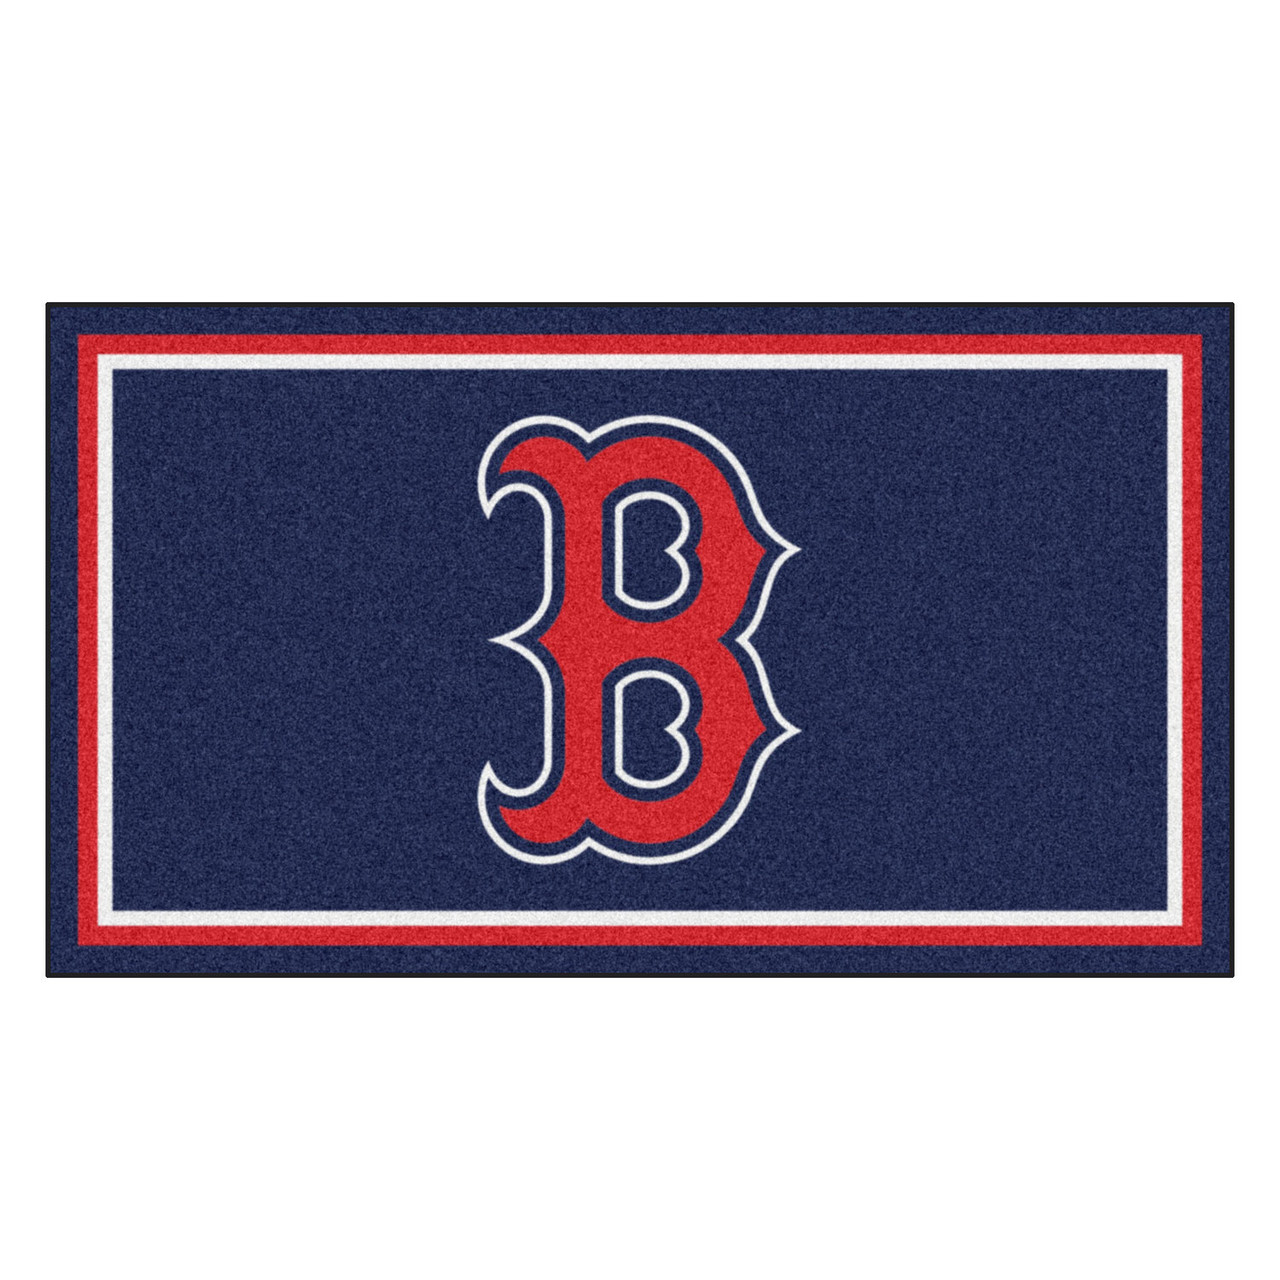  Boston Red Sox Years Series Champions 3x5 Foot